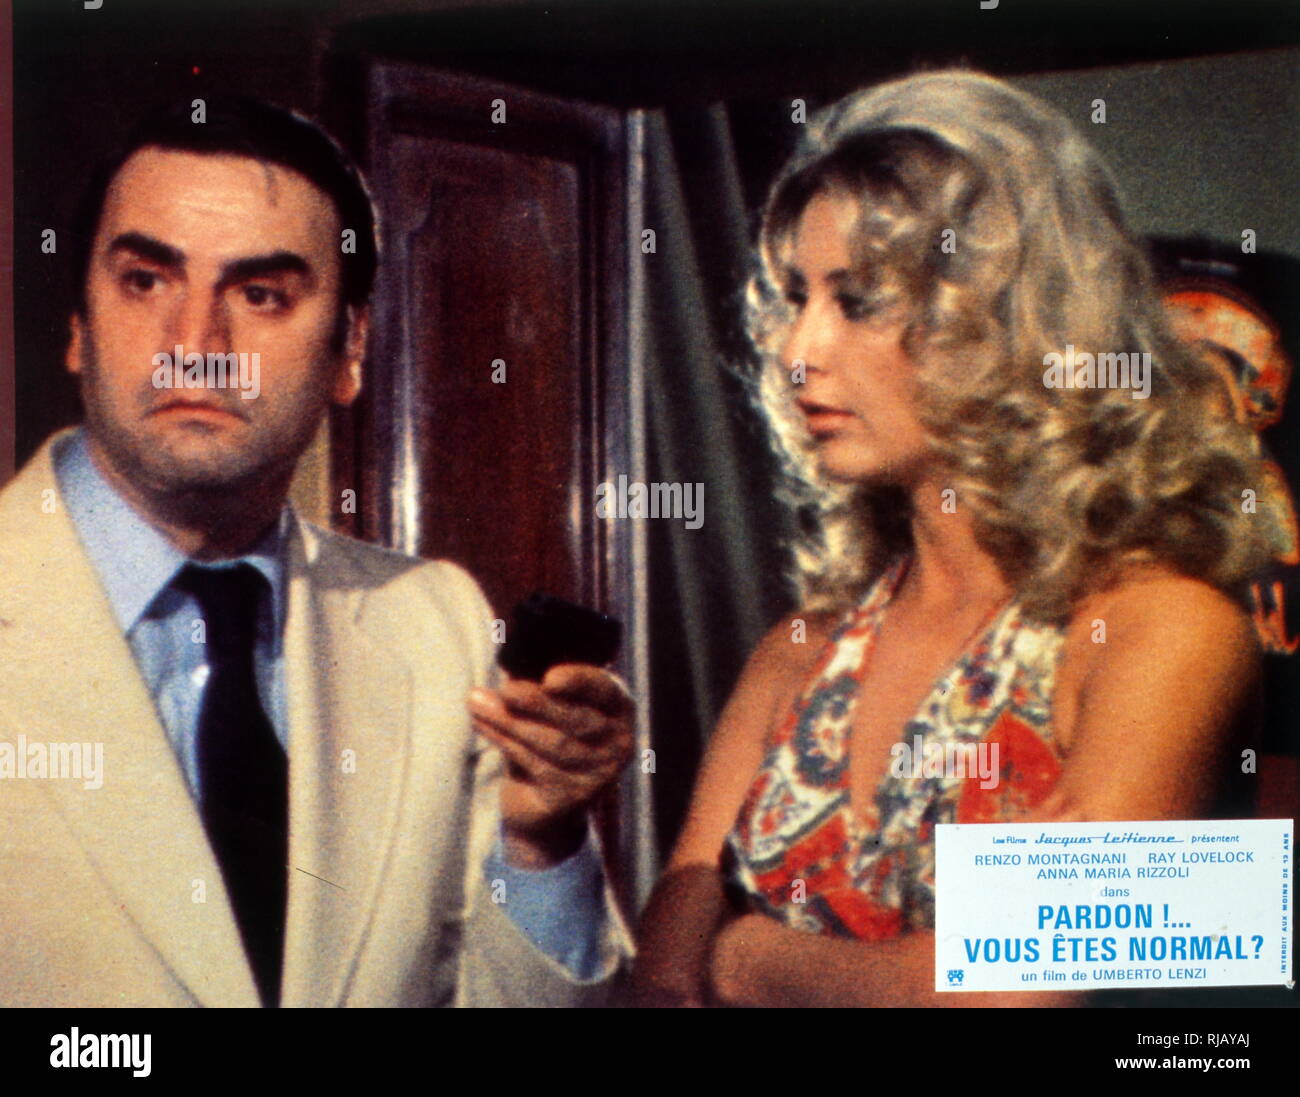 Pardon!...Vous etes normal? Scusi lei e normale? (Pardon Me, Are You Normal?); 1979 Italian comedy film, directed by Umberto Lenzi and starring Renzo Montagnani, Ray Lovelock and Anna Maria Rizzoli. Stock Photo